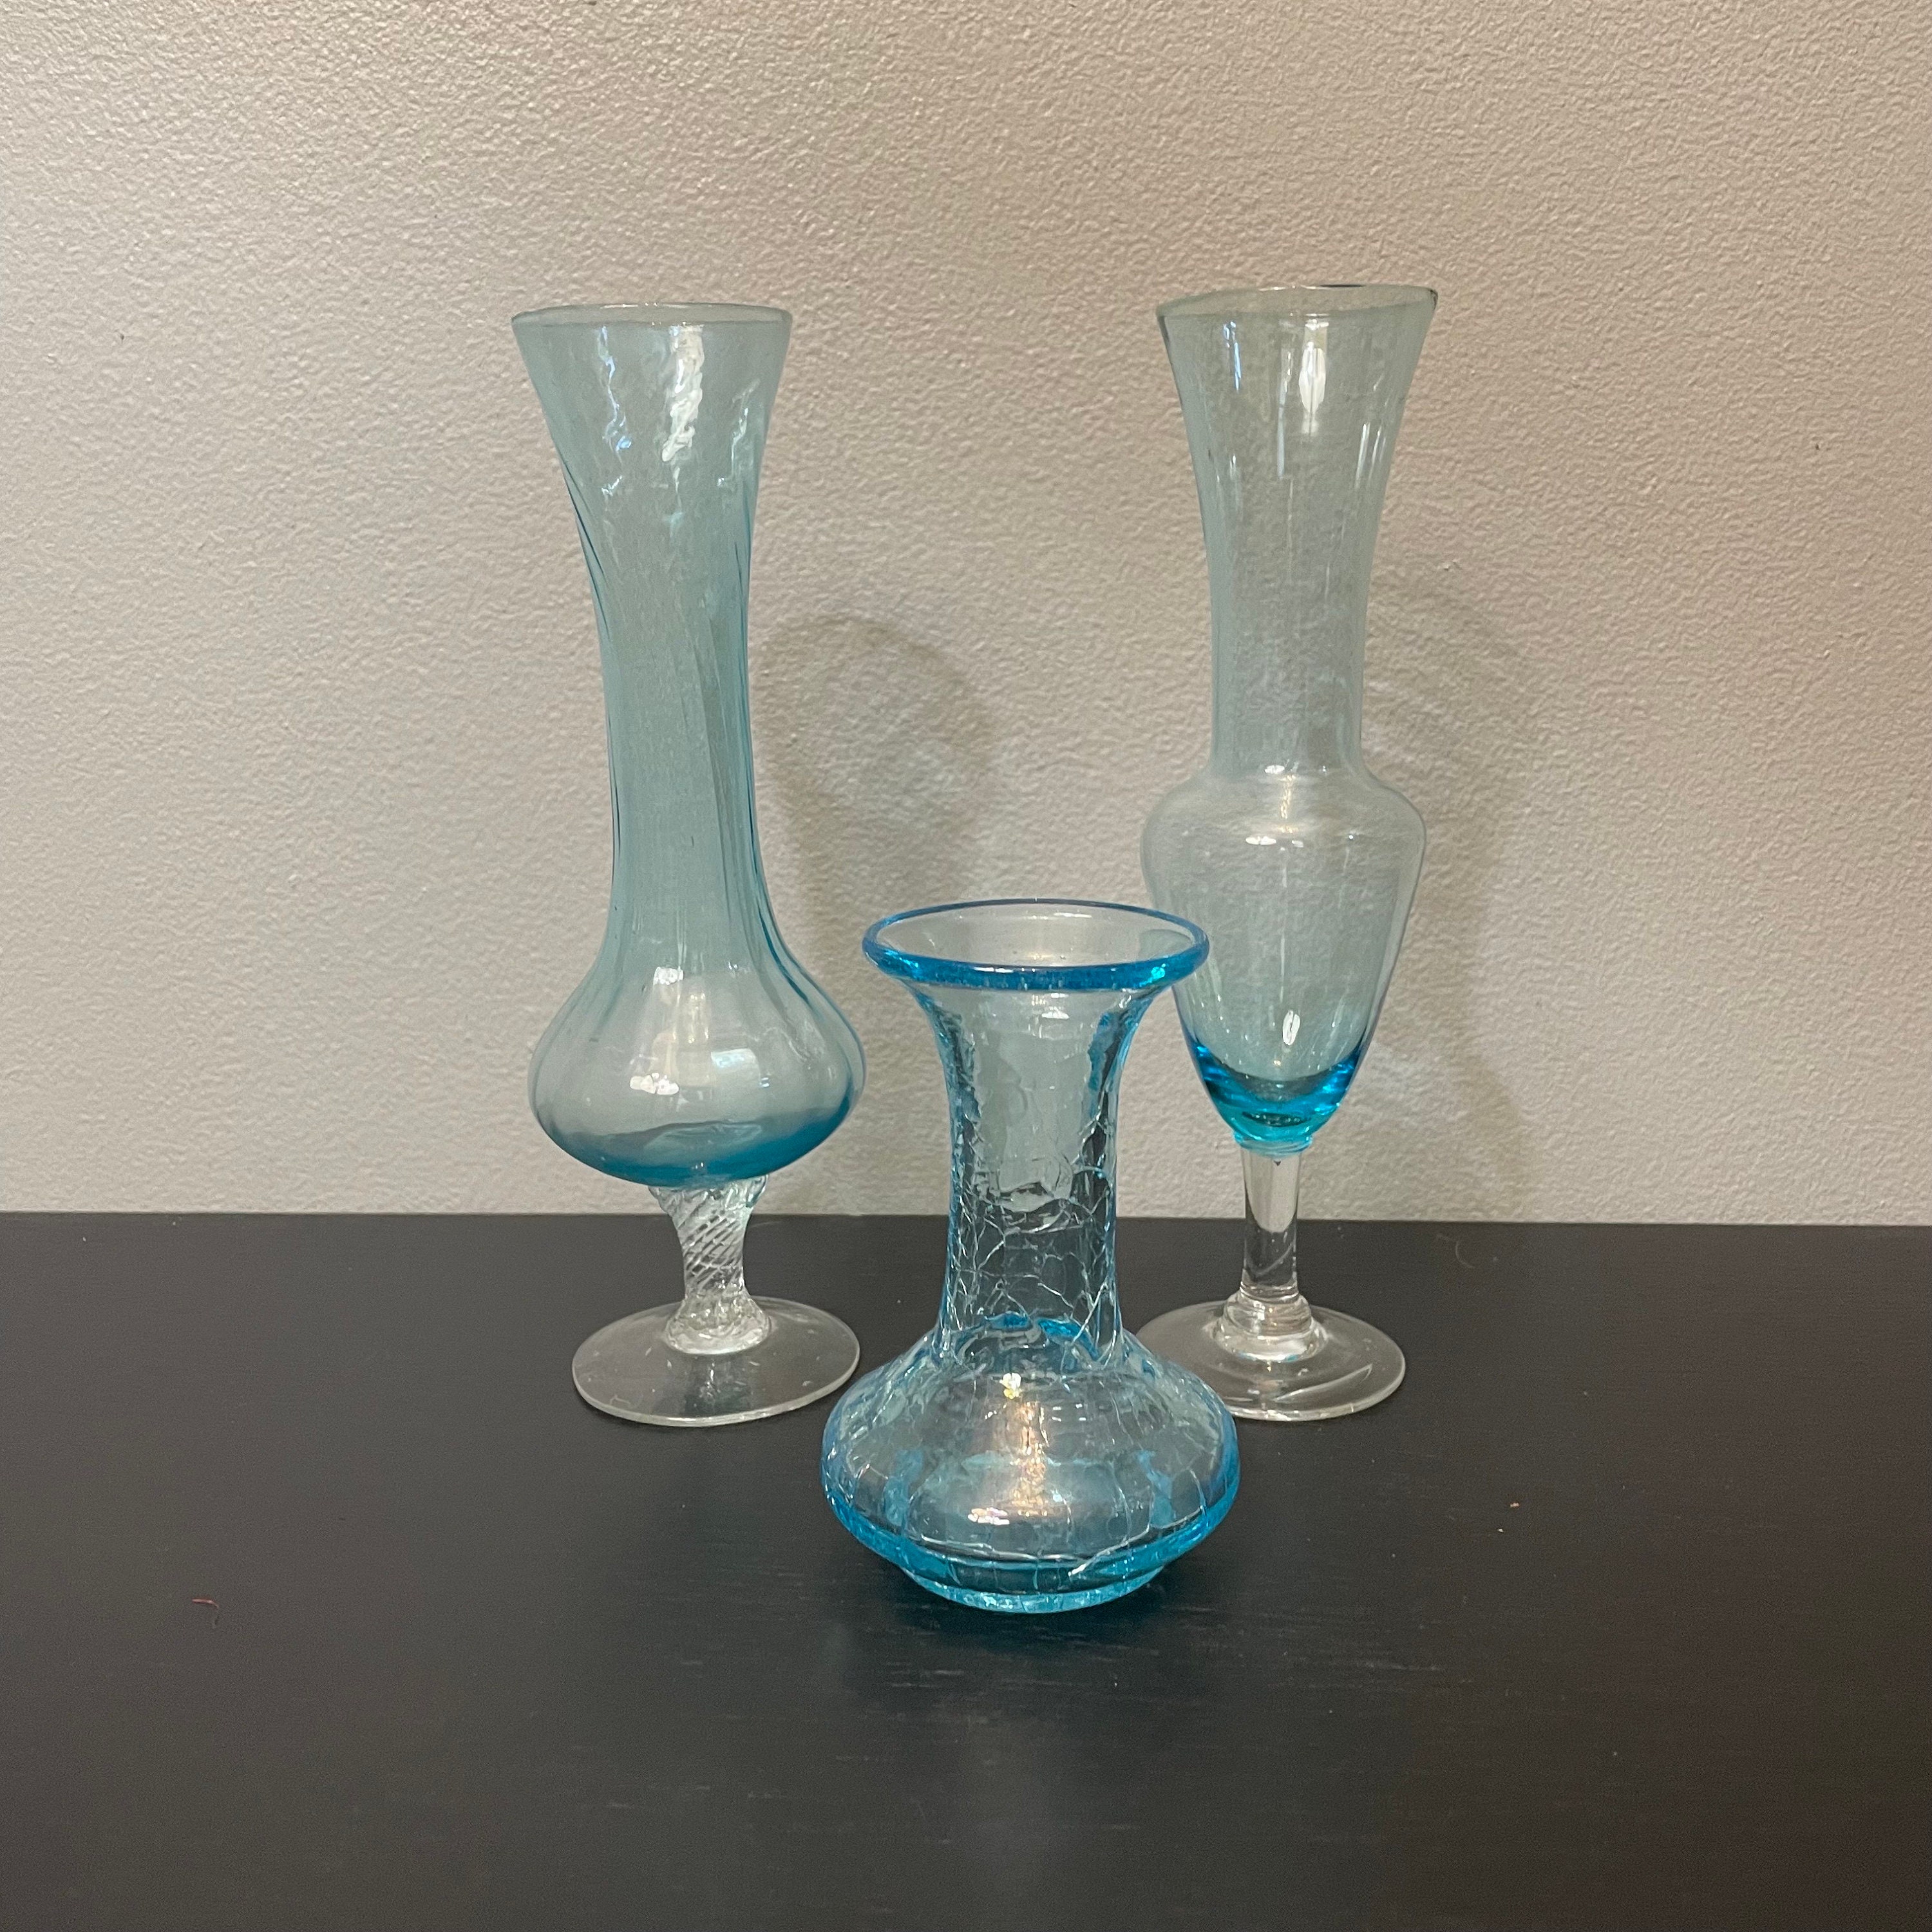 Set of 3 Aqua Blue Glass Bud Vases Collection of Aqua Color Glass Vases  8.25 to 4.25 Tall 